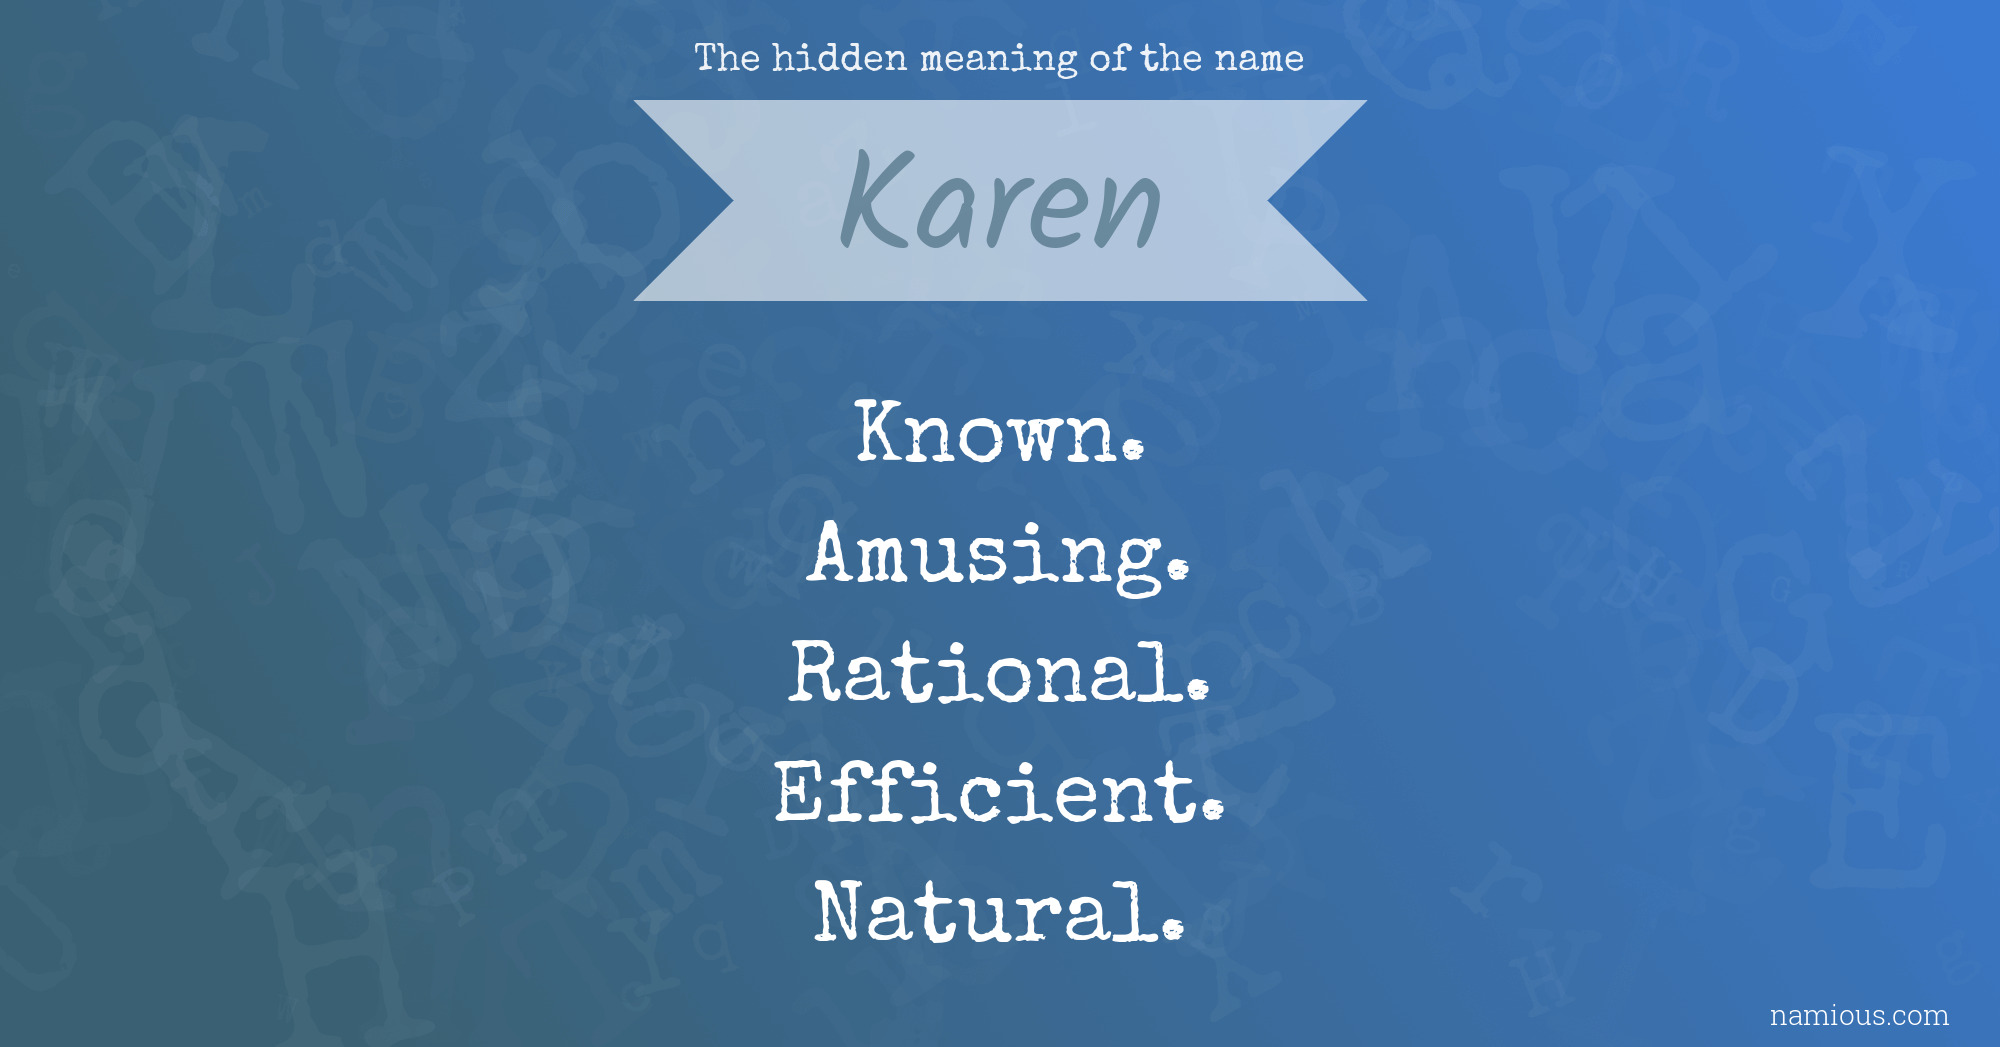 The hidden meaning of the name Karen